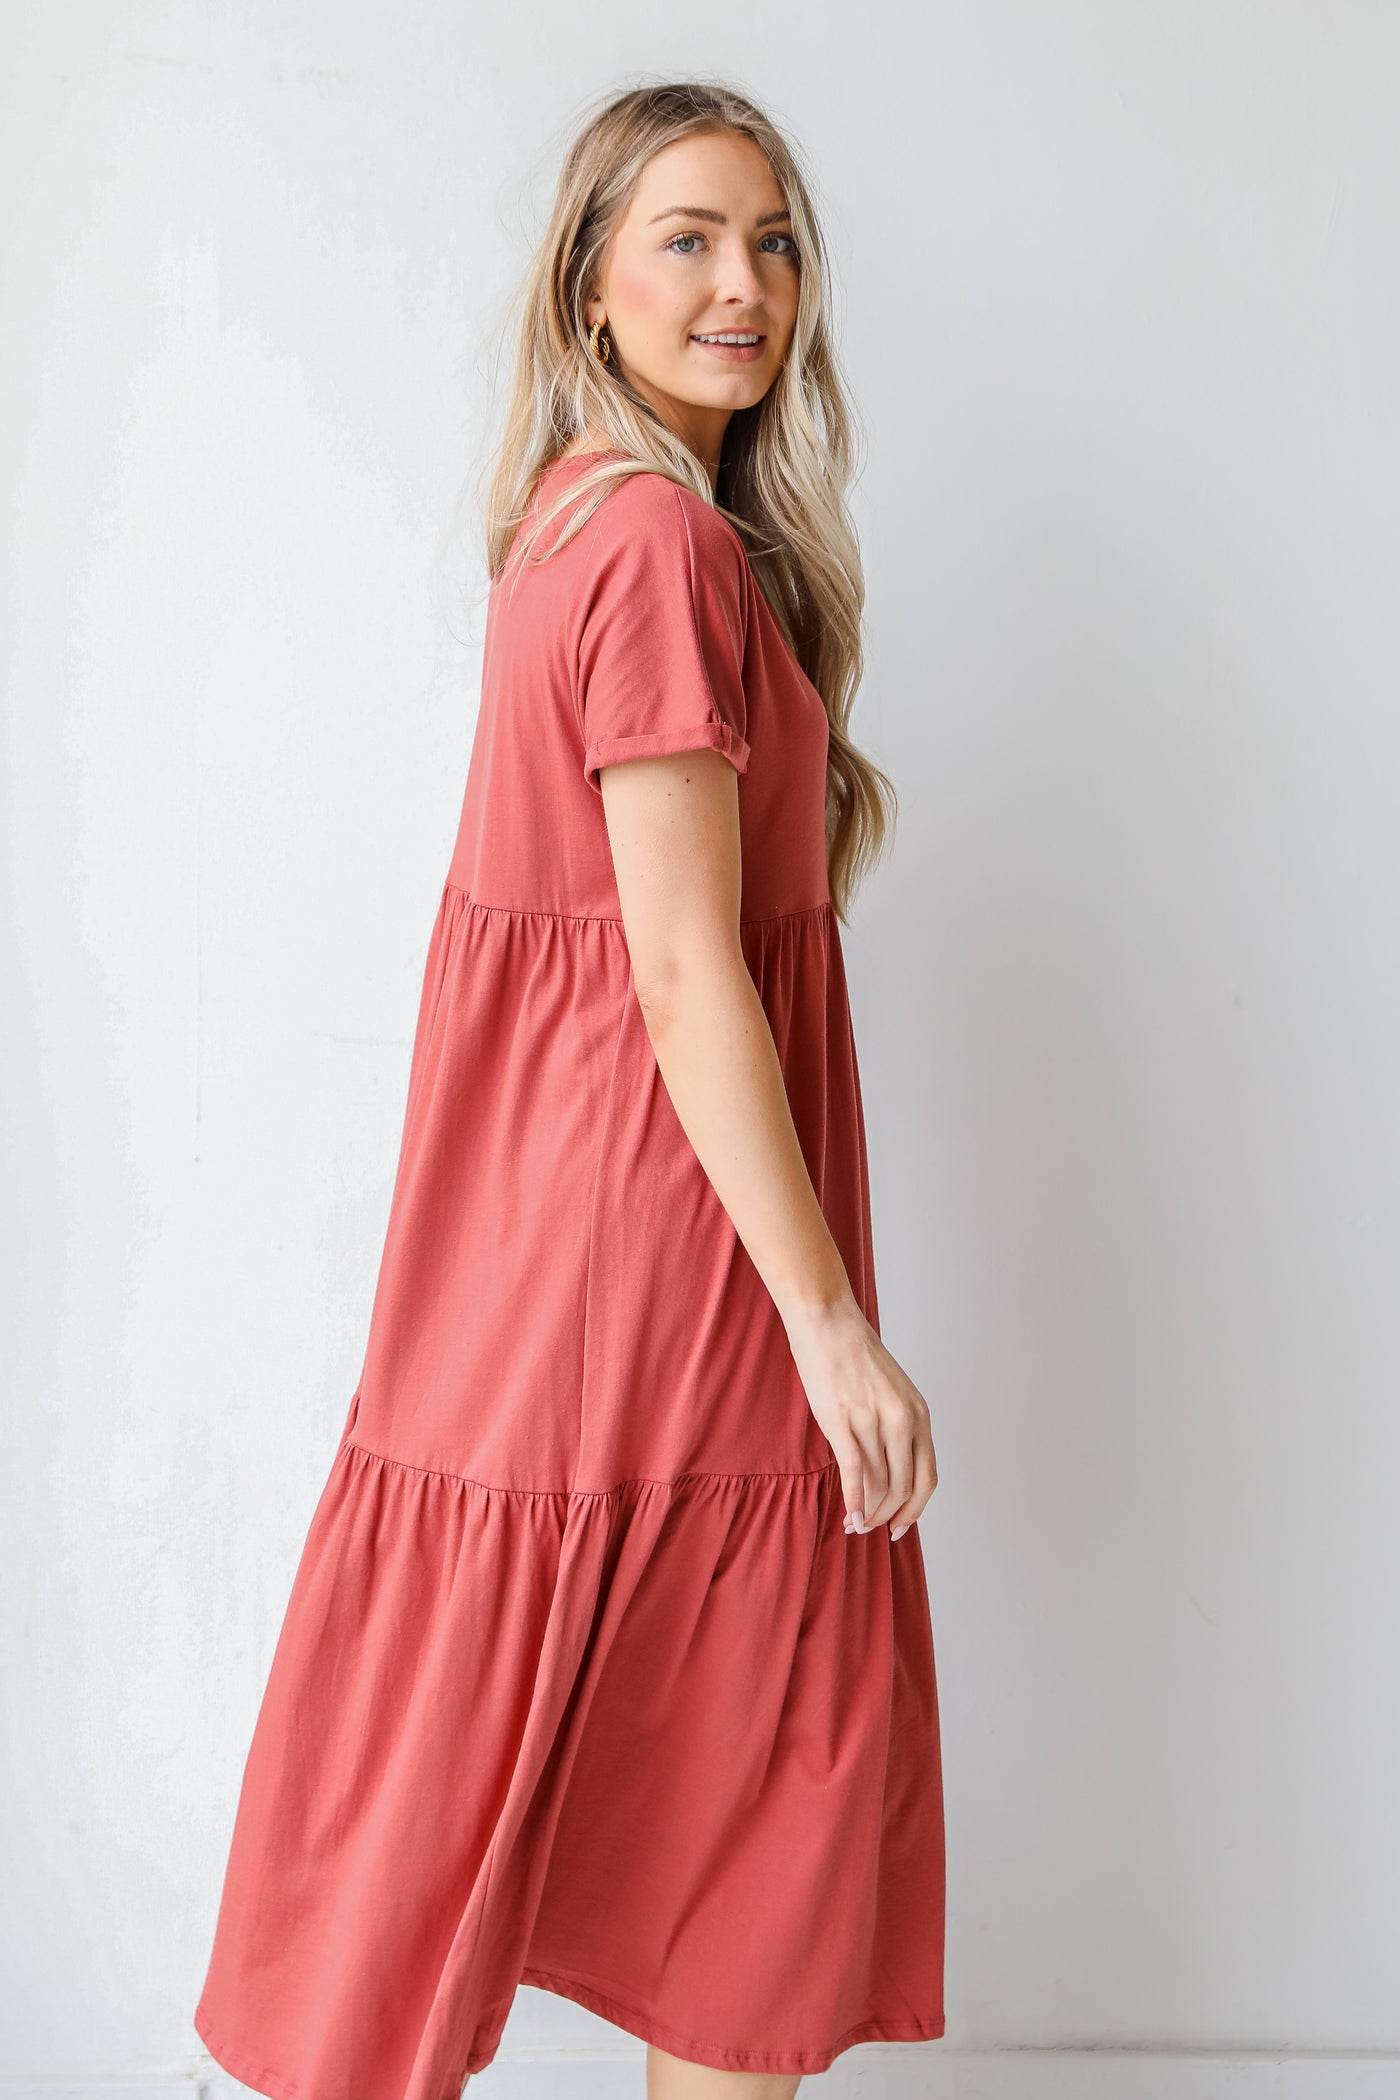 Tiered Midi Dress in marsala side view